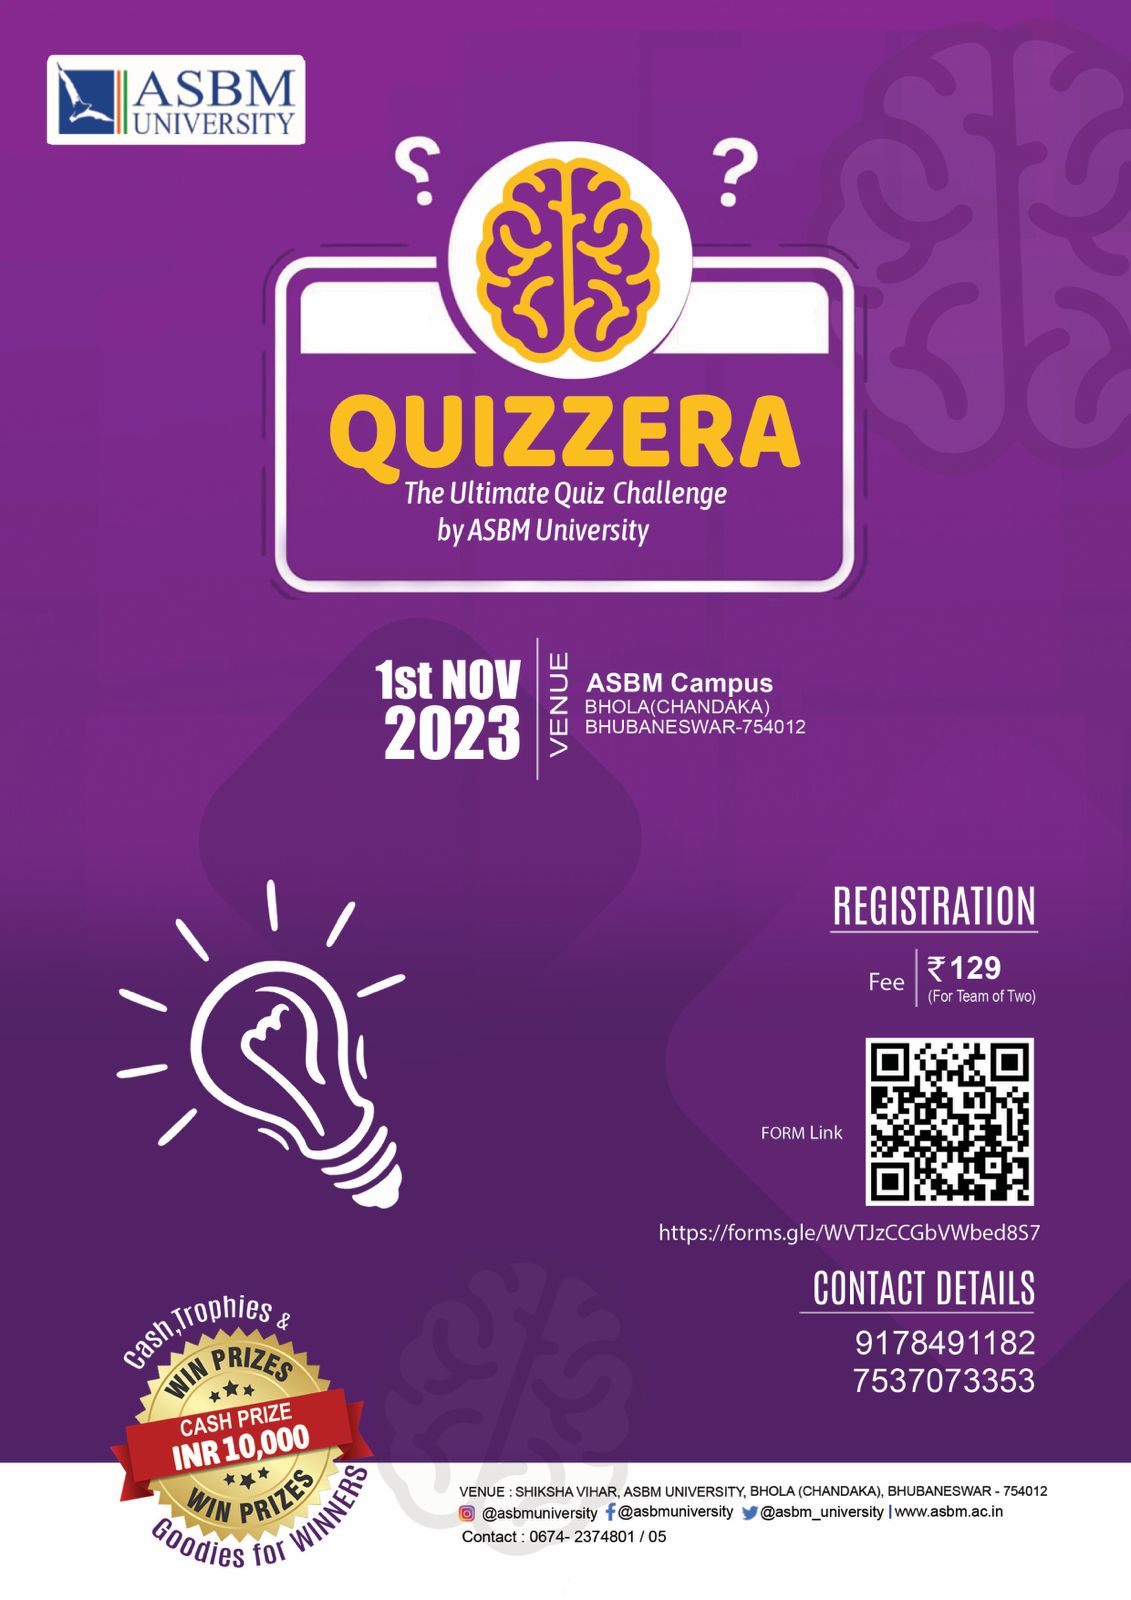 QUIZZERA – The Ultimate Quiz Challenge by ASBM UNIVERSITY